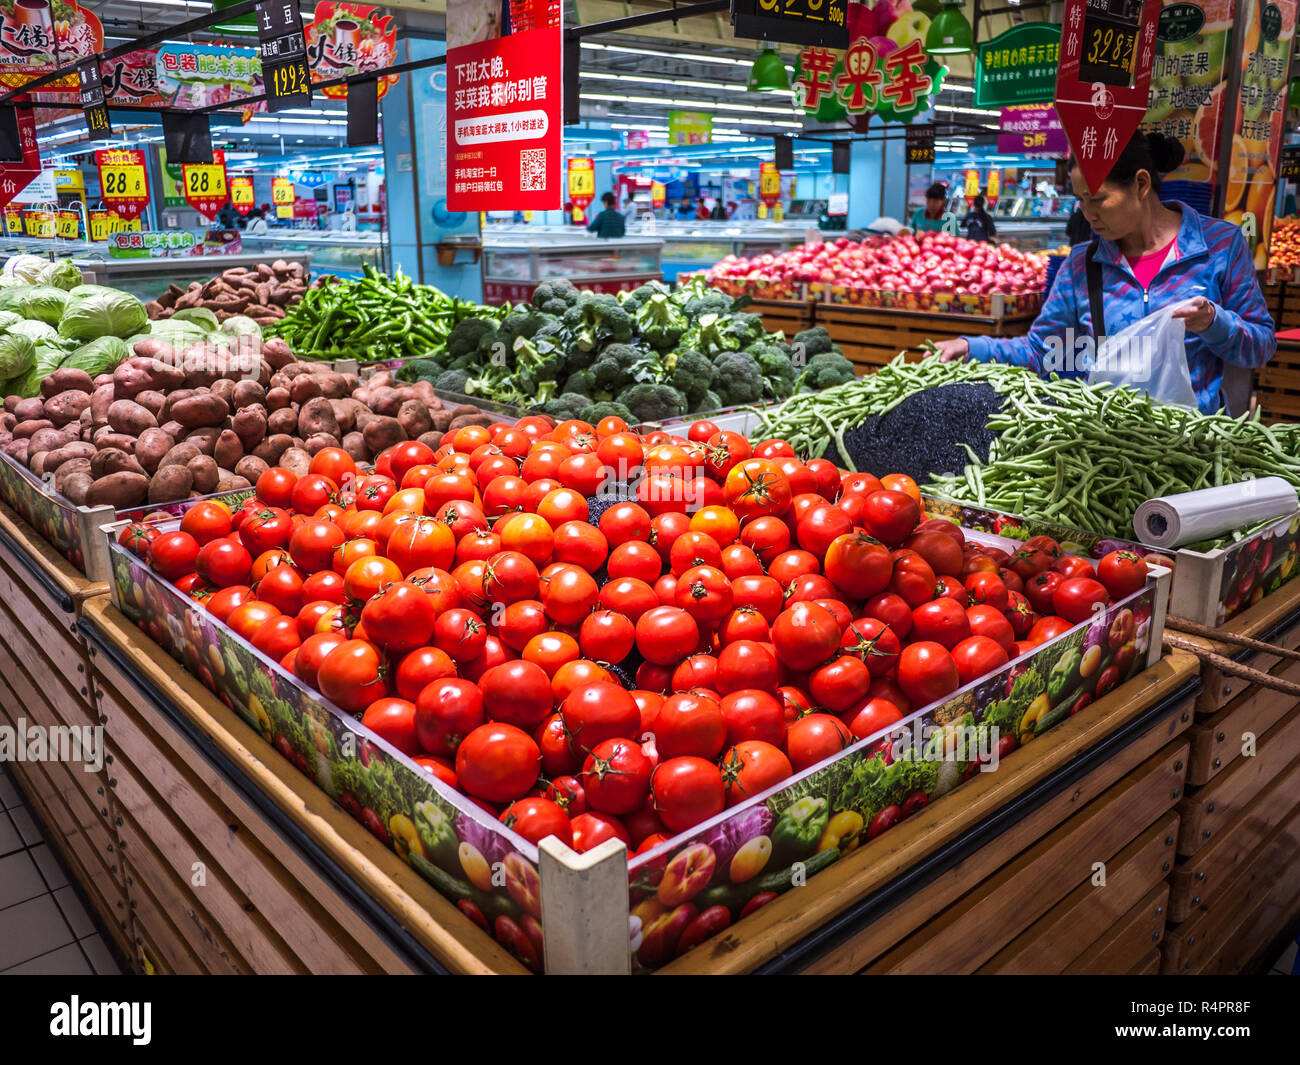 Fresh vegetables displayed in supermarket for customers to choose. RT-Mart, City of Liuzhou, Guangxi, China. Stock Photo